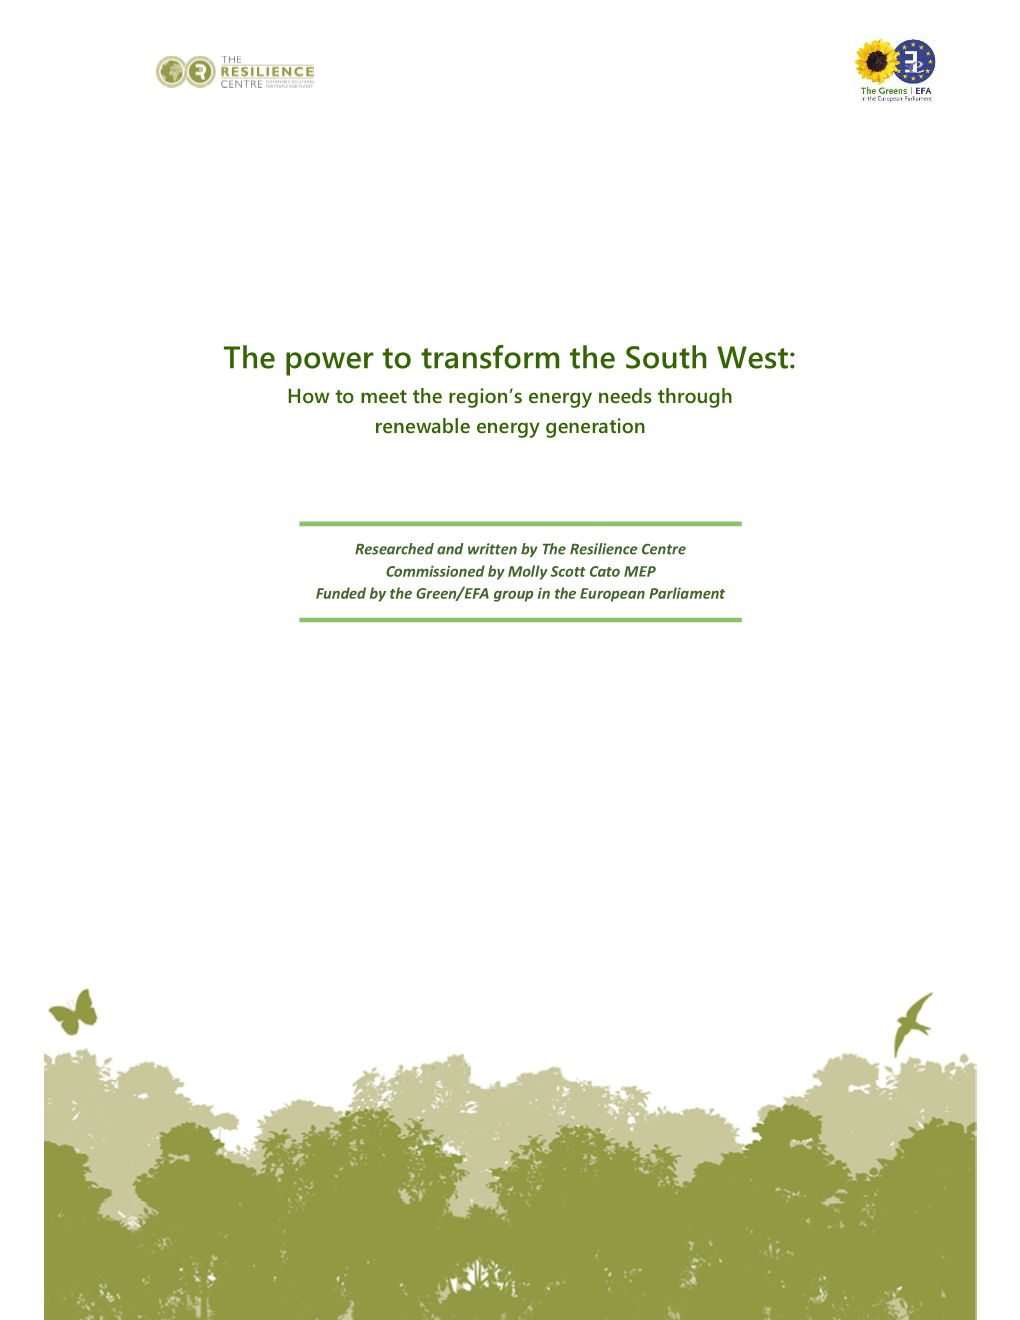 The Power to Transform the South West: How to Meet the Region’S Energy Needs Through Renewable Energy Generation